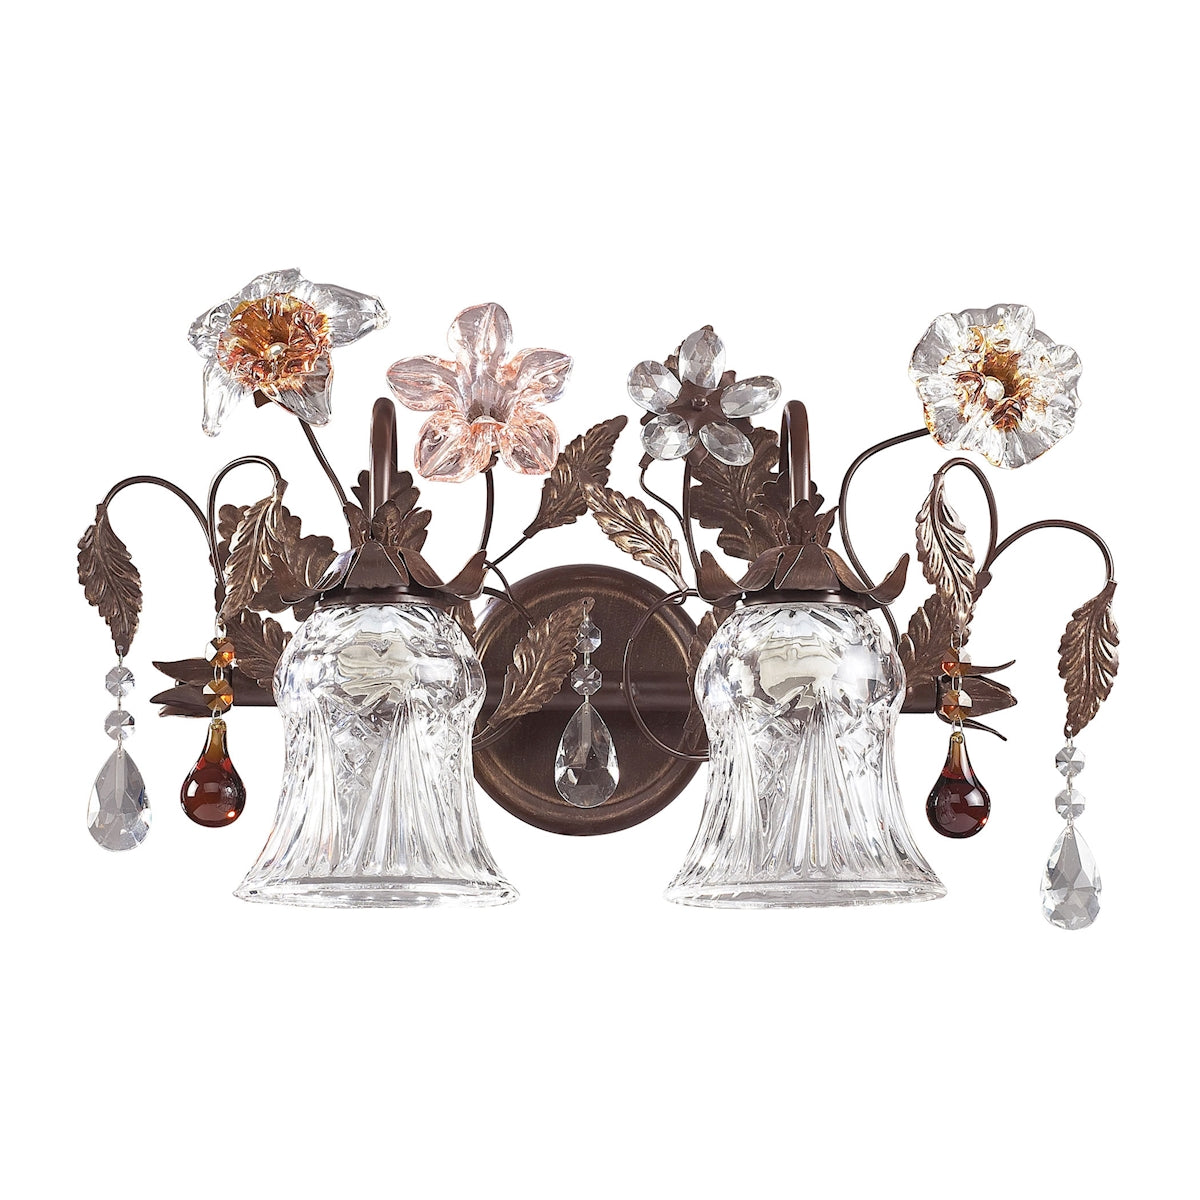 ELK Lighting 7040/2 Cristallo Fiore 2-Light Vanity Lamp in Deep Rust with Clear and Amber Florets